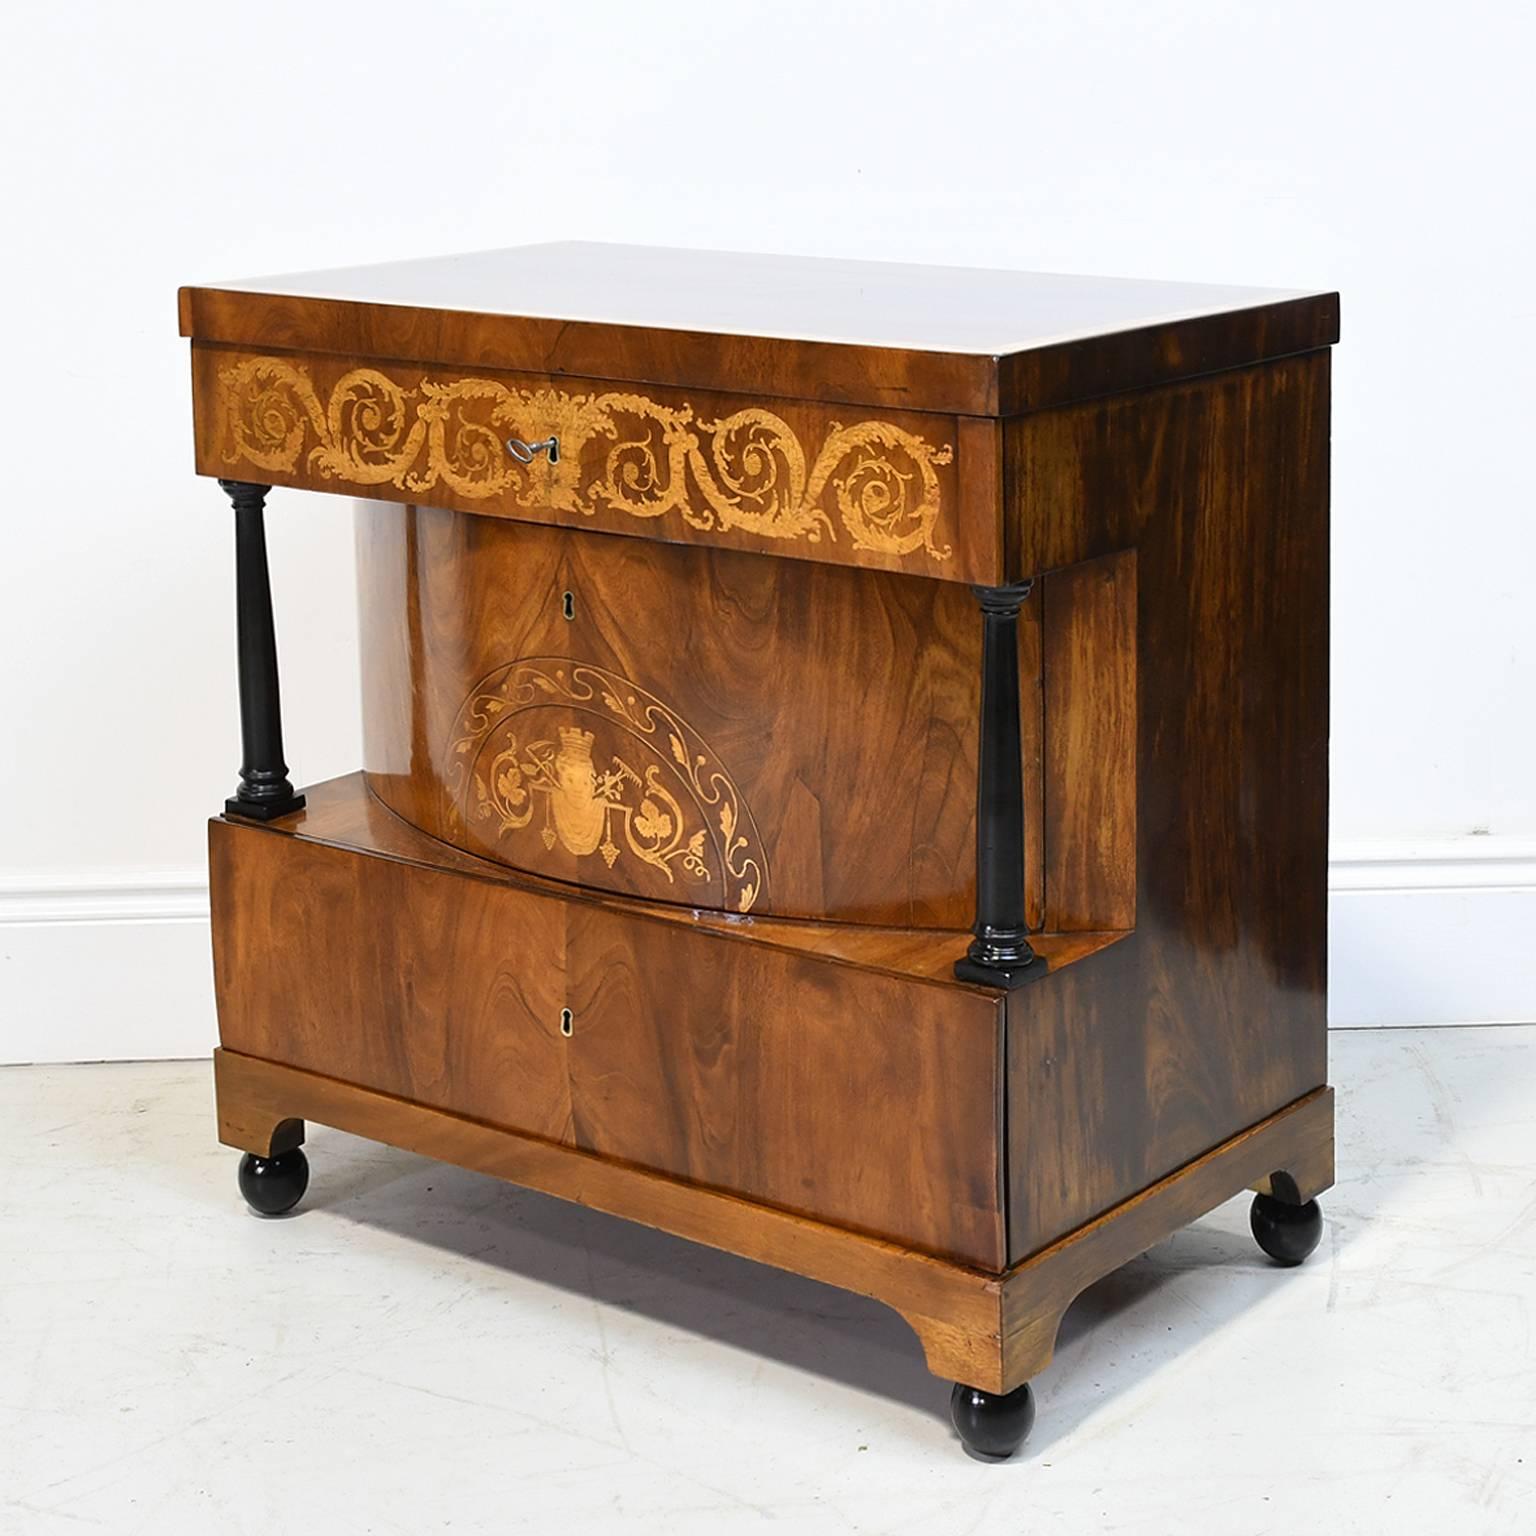 A very fine Biedermeier parcel-ebonized mahogany commode with top above a single drawer floridly inlaid with scrolling acanthus marquetry, the second convex-drawer inlaid with a scrolling foliate lunette and flanked by ebonized columns, and the